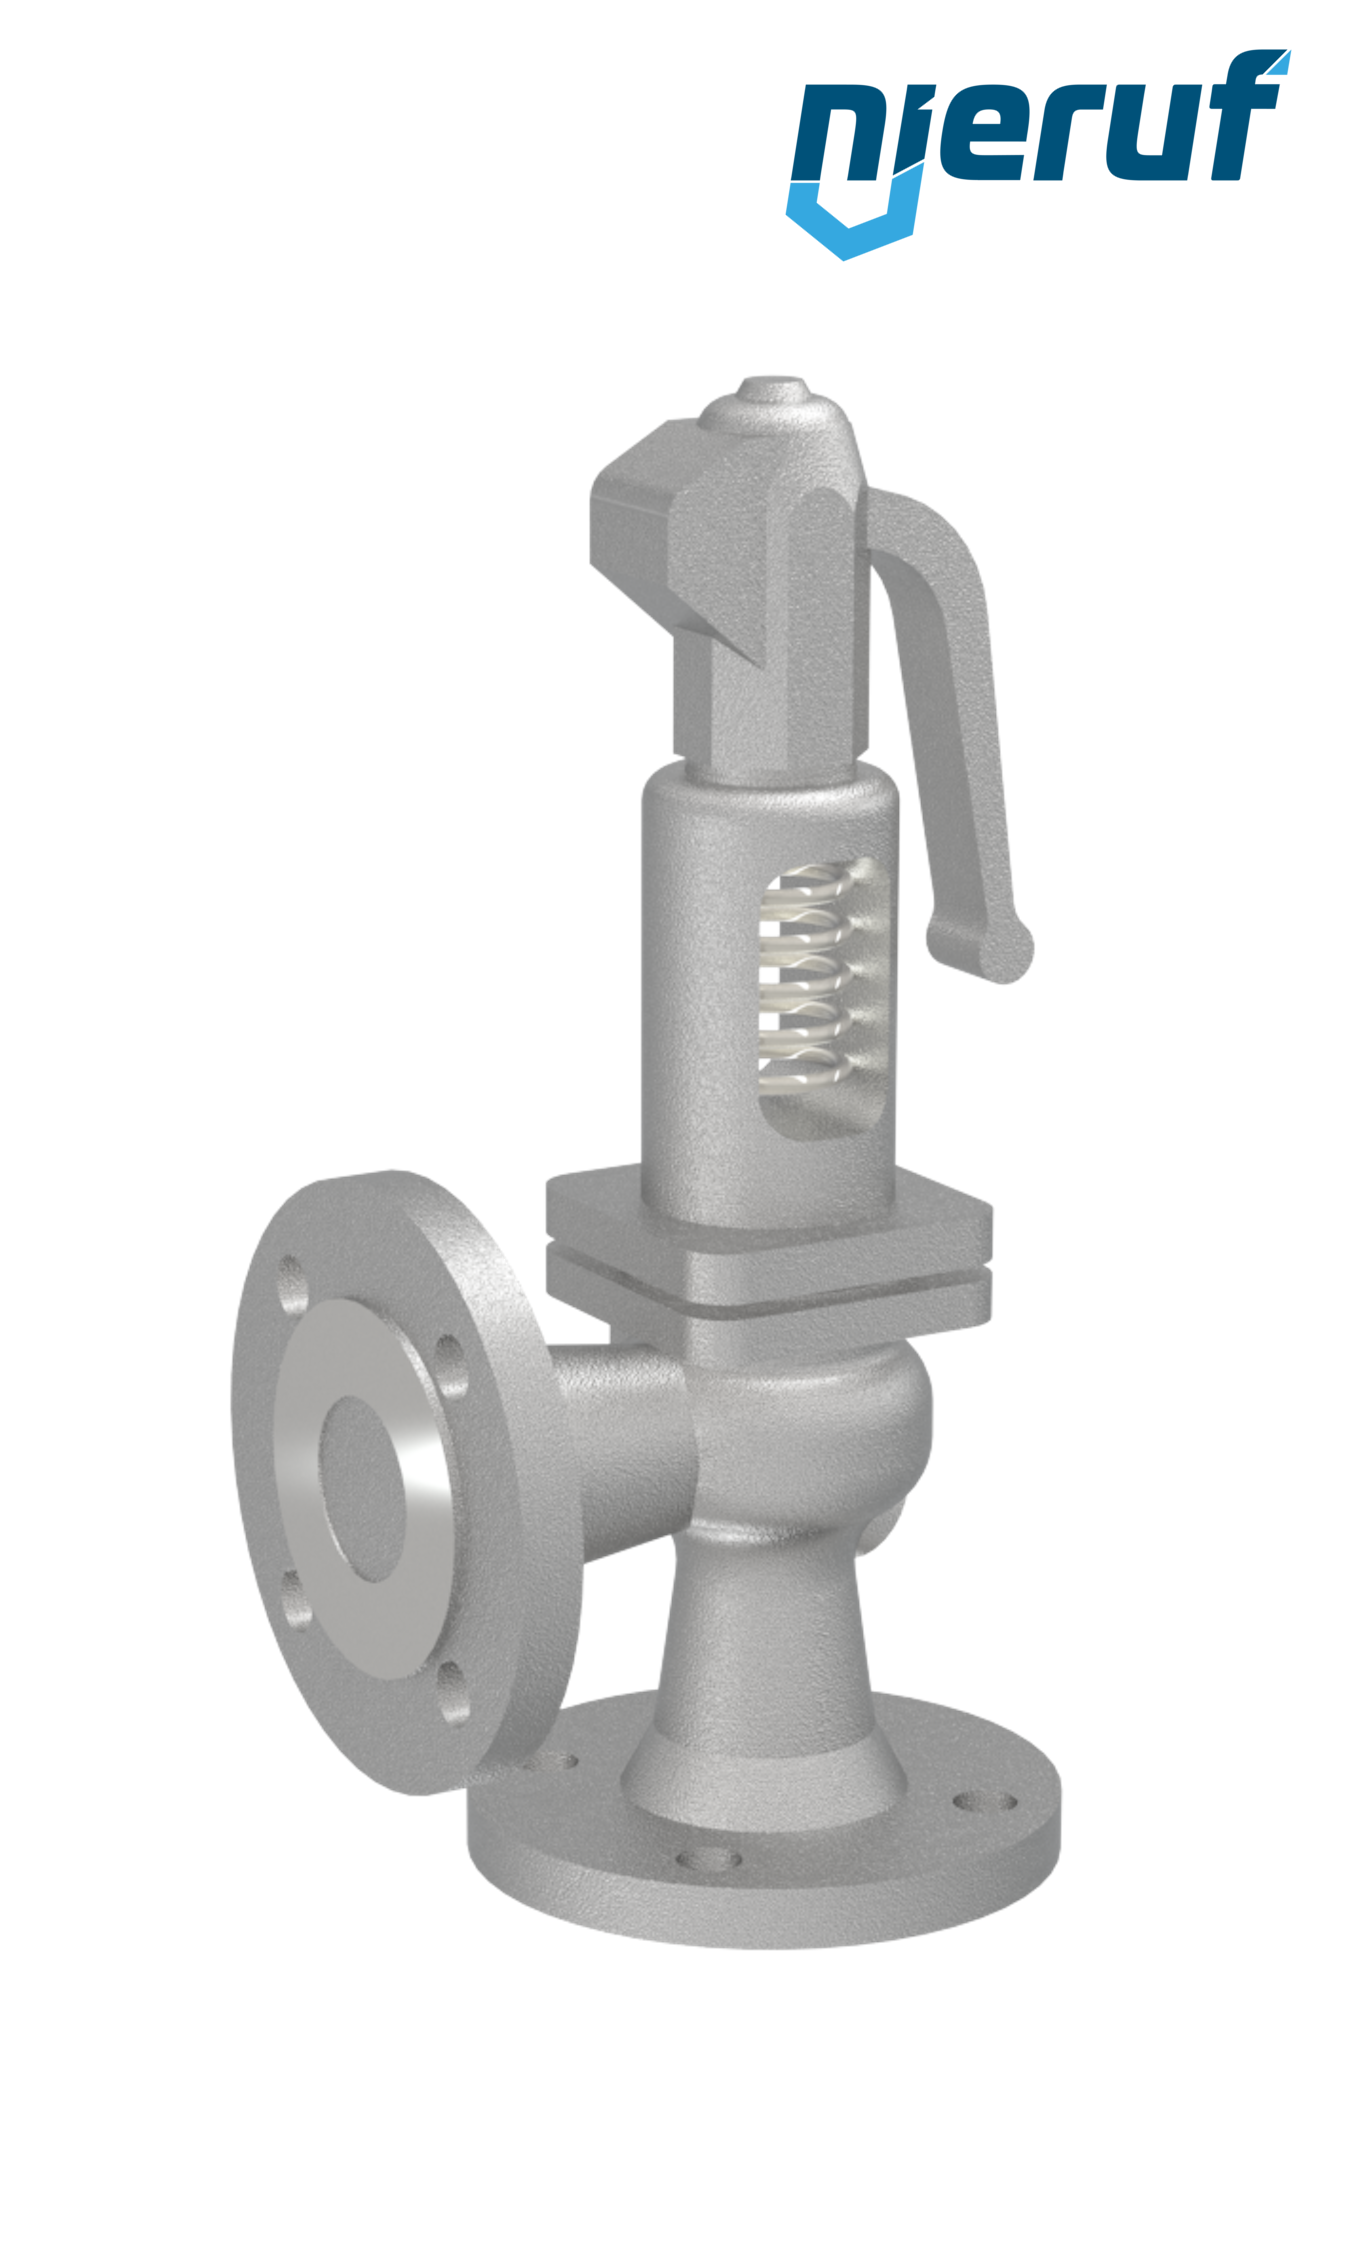 flange-safety valve DN80/DN80 SF0202, cast steel metal, with lever